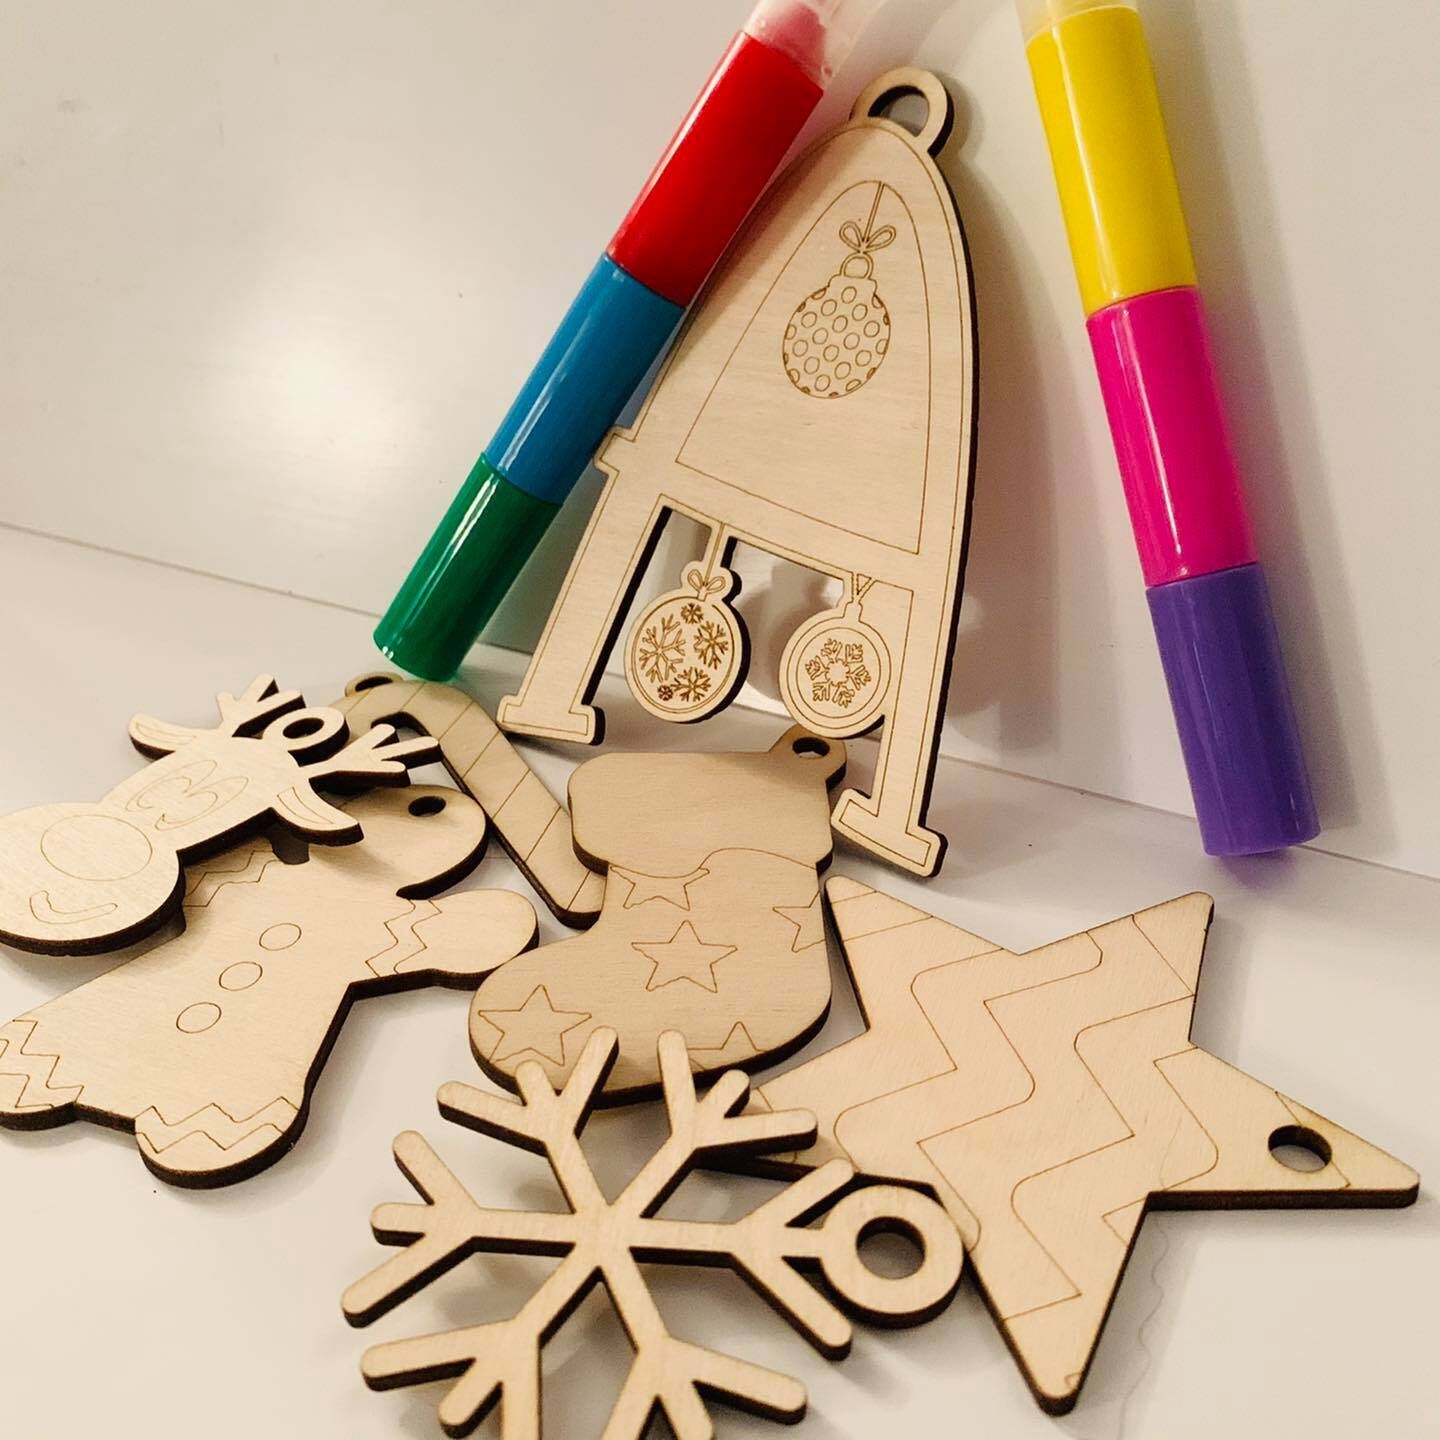 DIY Christmas Ornament Crafting (complete With Pens)